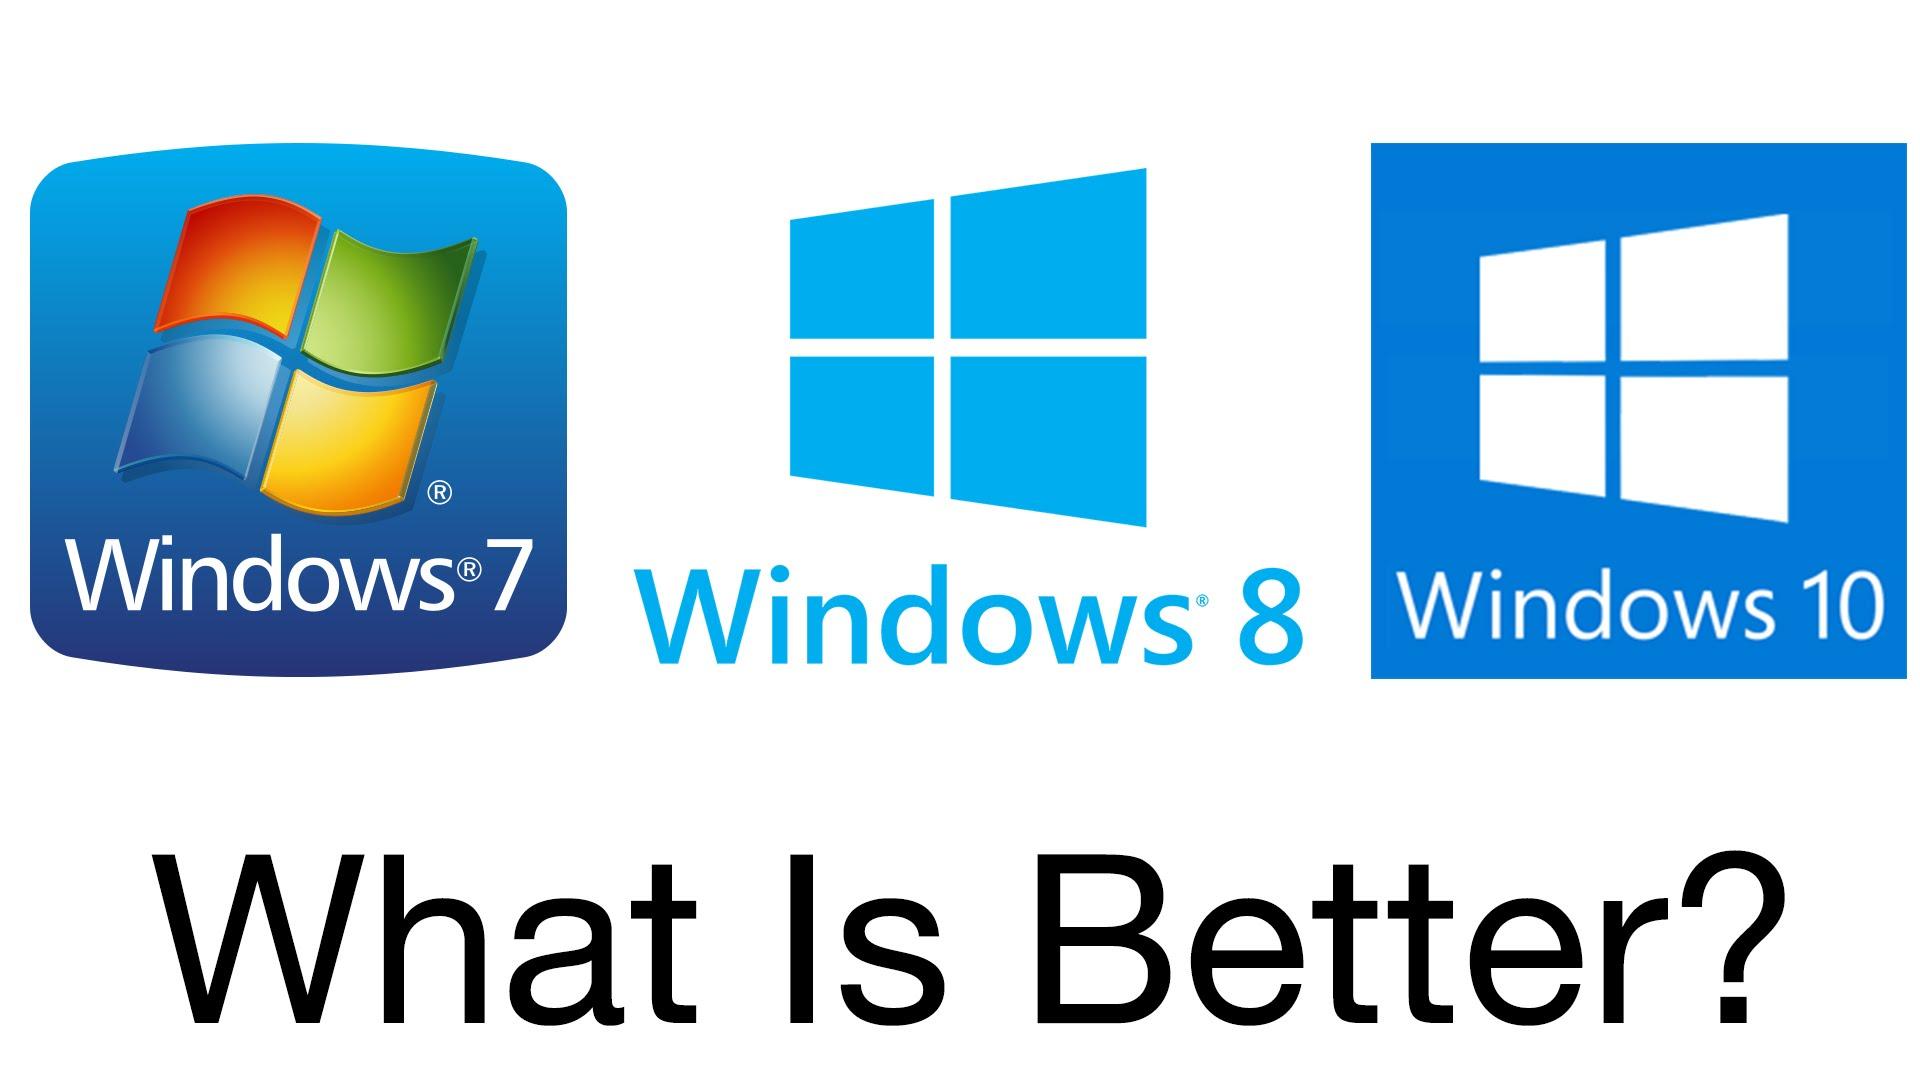 Simple Window 8 Logo - Know the Difference Between Windows Windows 8 and Windows 10